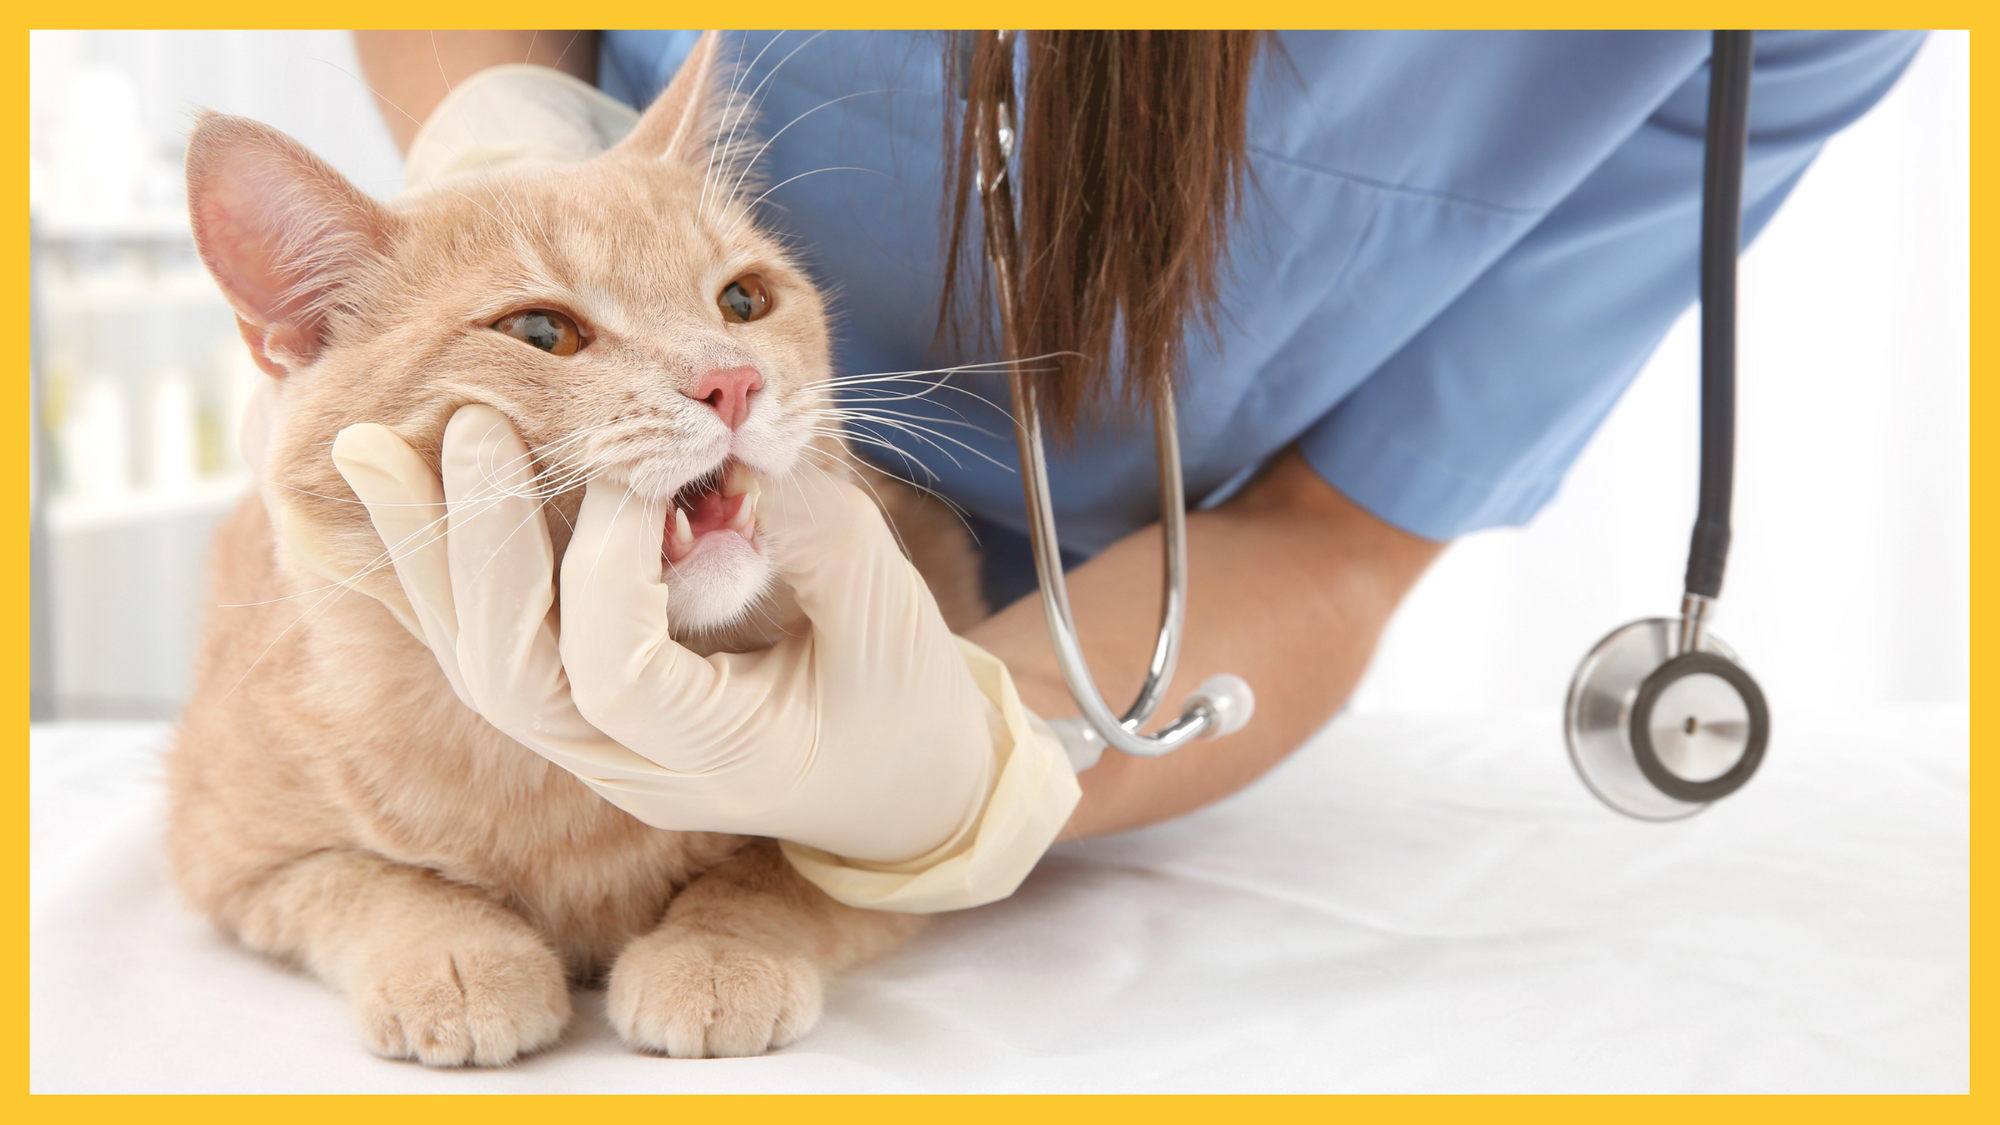 Detecting Dental Disease in Your Pet: Signs, Causes, and Natural Preventative Care